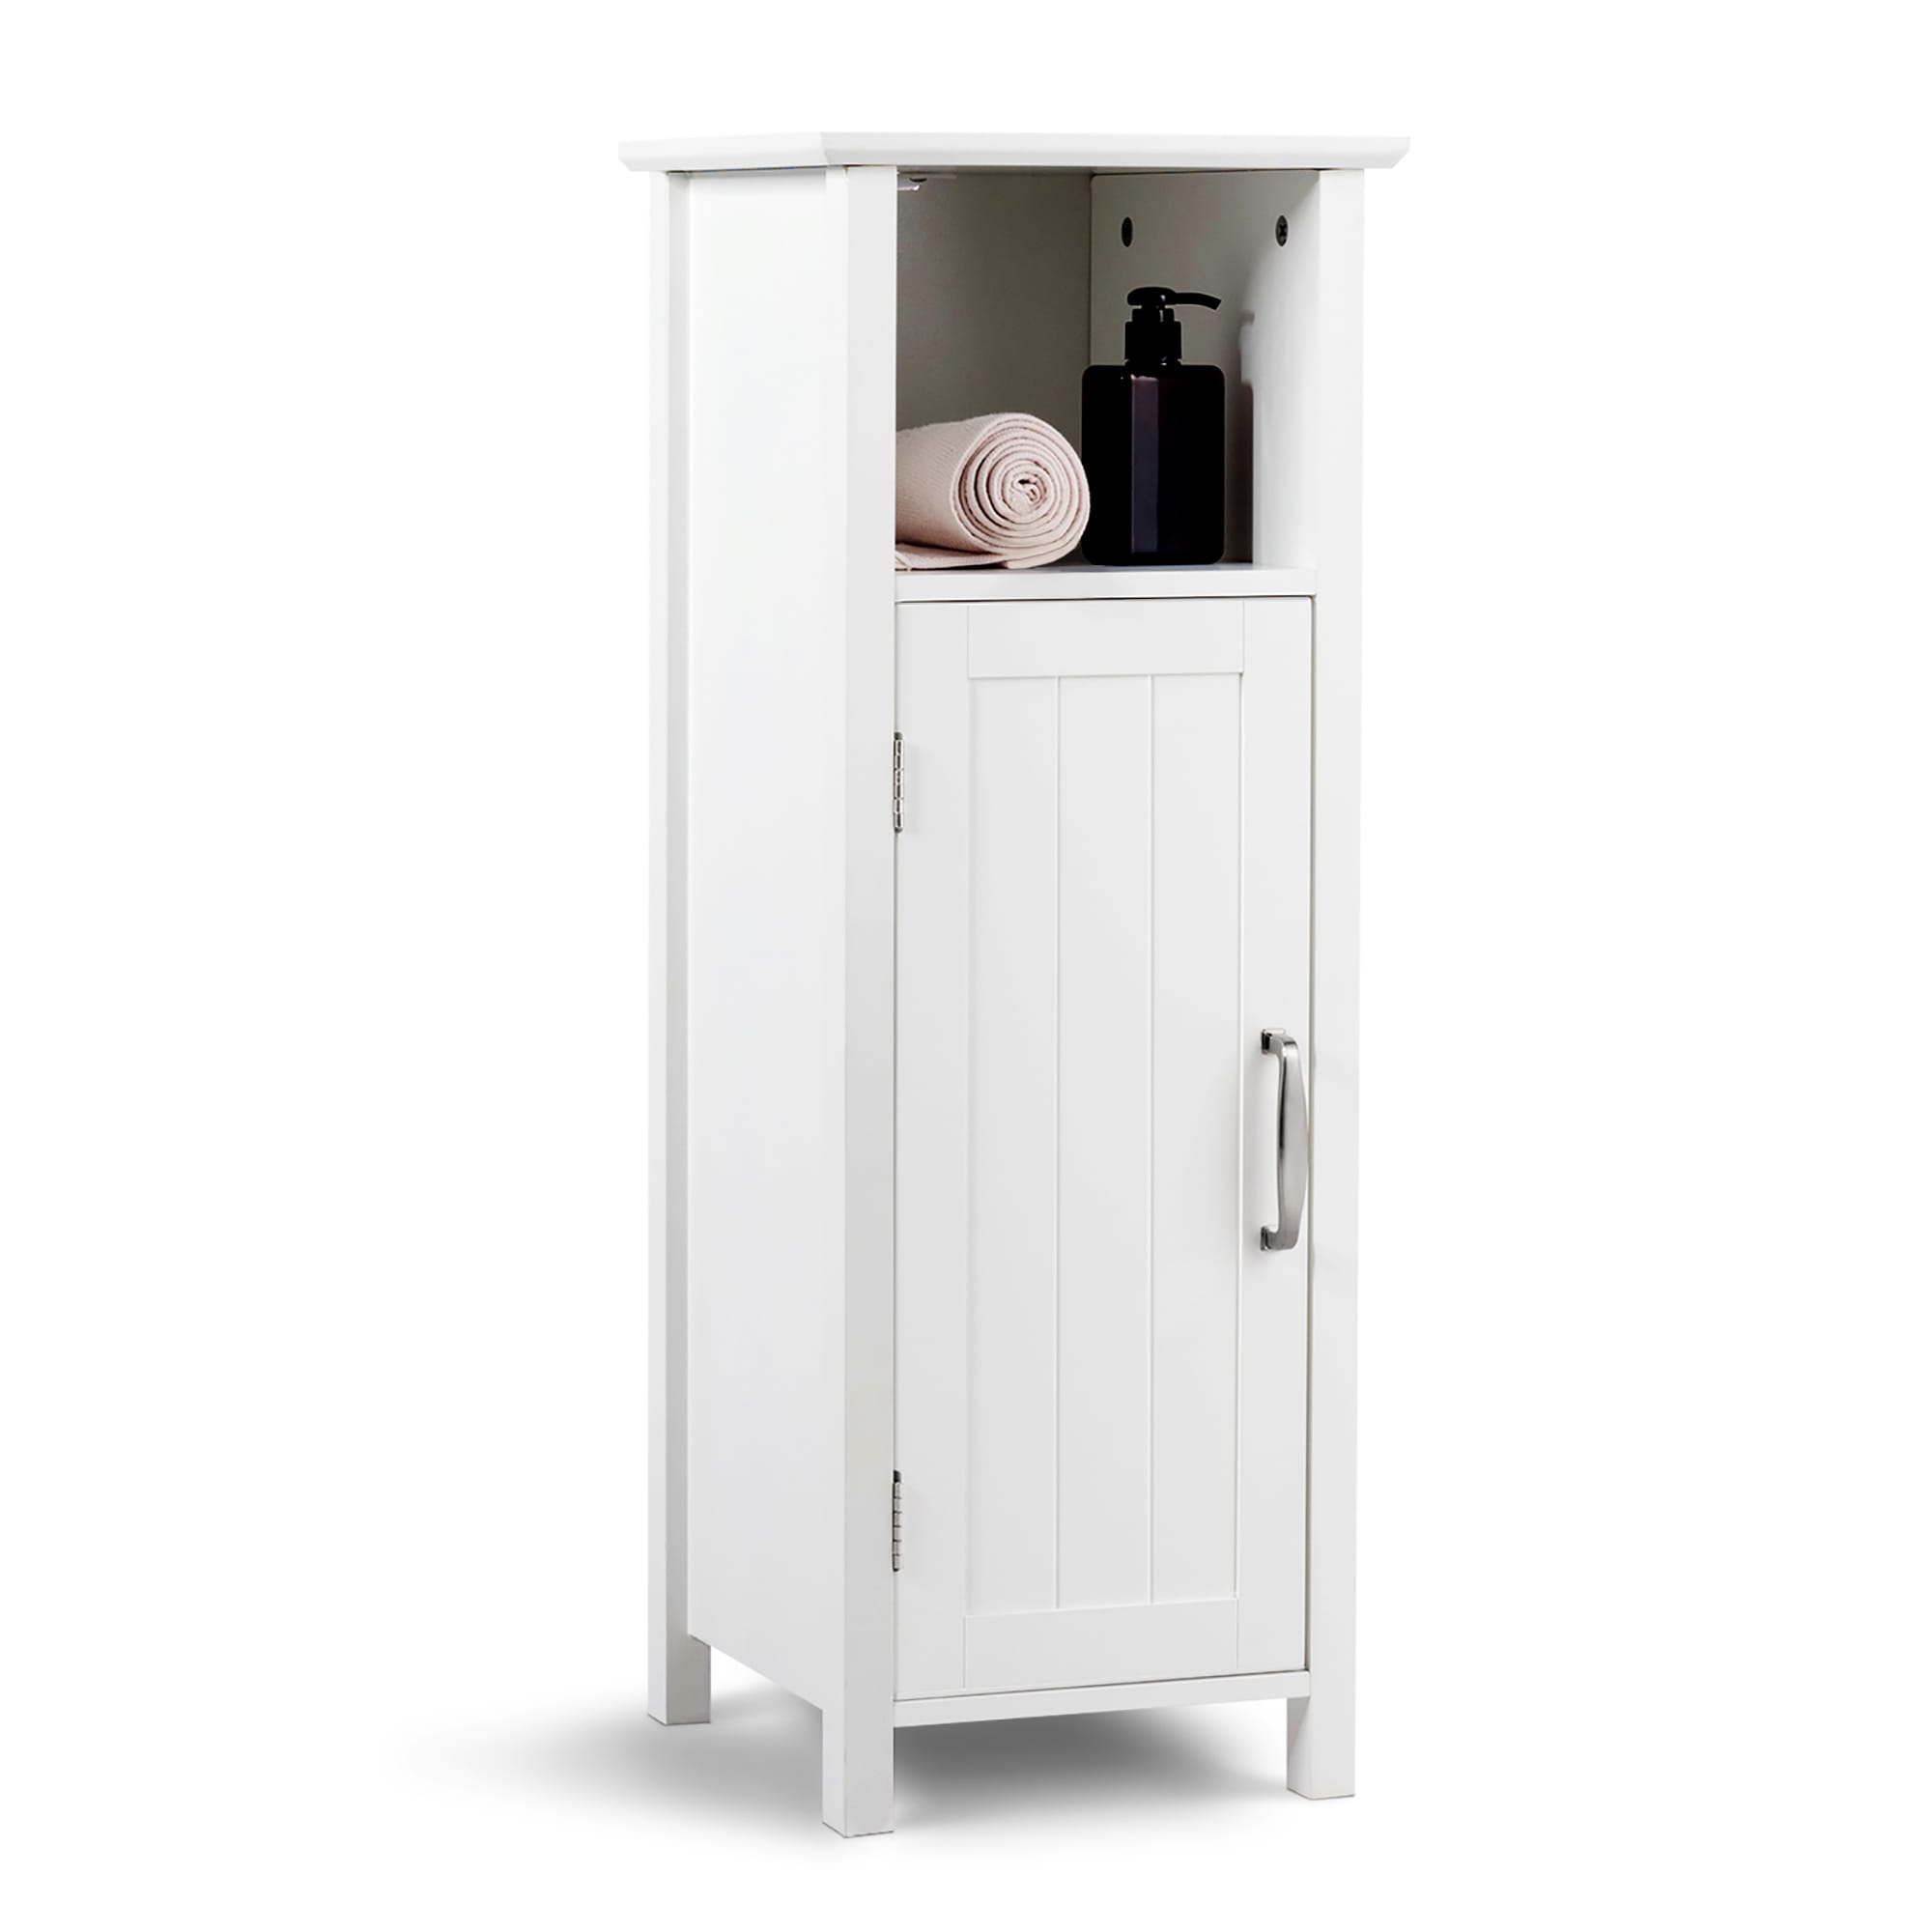 https://ak1.ostkcdn.com/images/products/is/images/direct/8402bf497e49f812dae1b19d232d4e9f878377e8/Gymax-Bathroom-Floor-Storage-Cabinet-Free-Standing-w--Single-Door.jpg